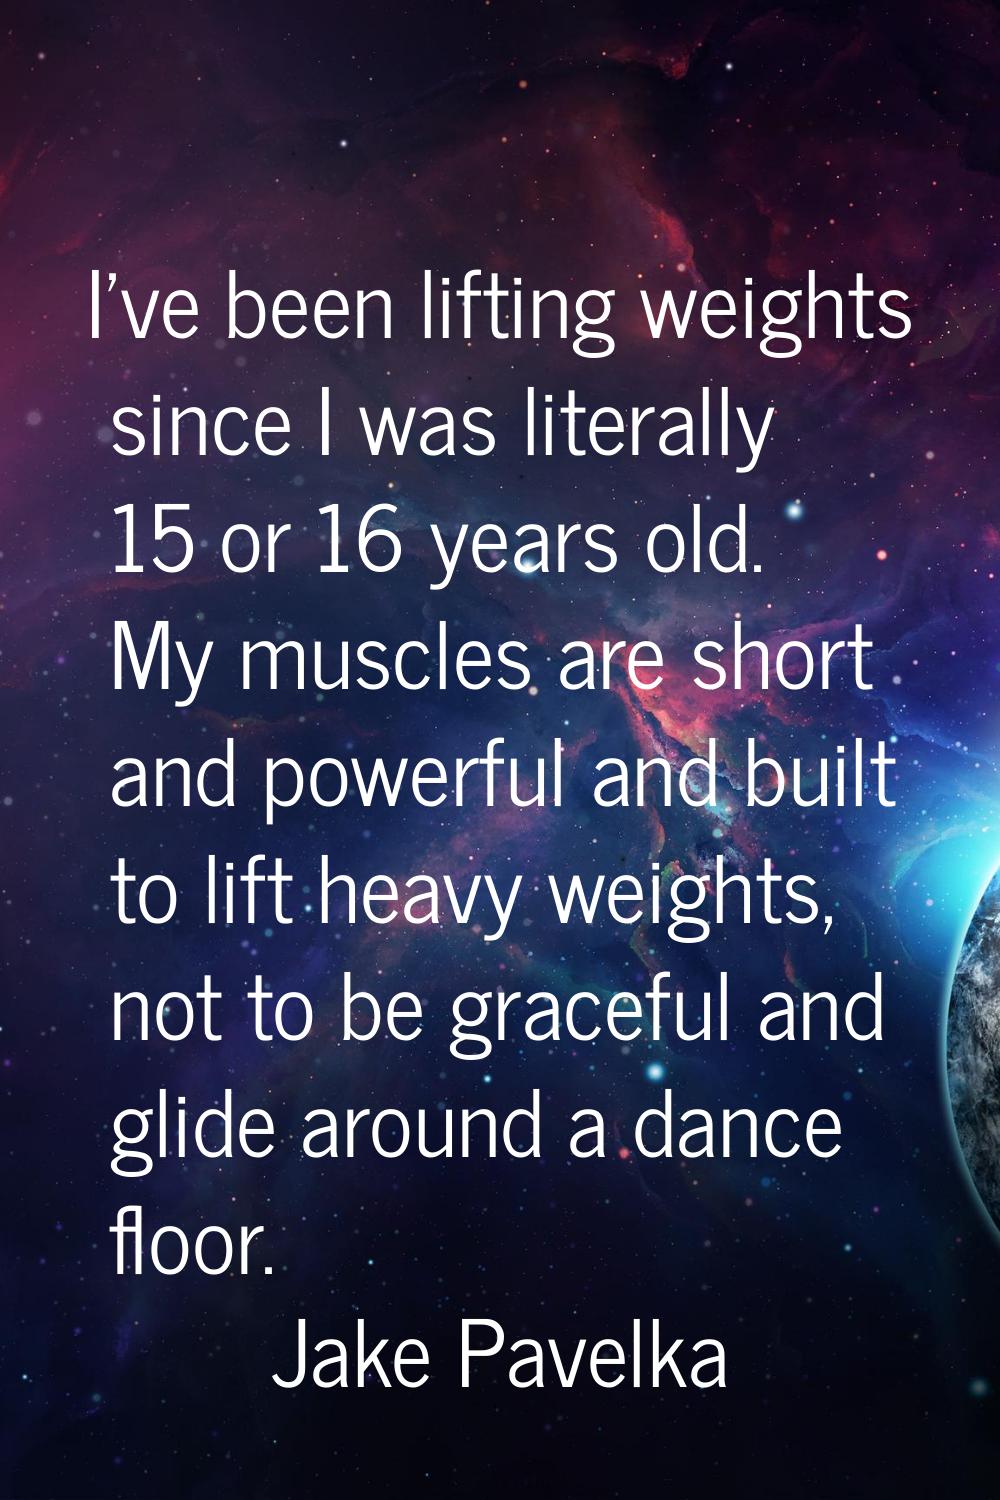 I've been lifting weights since I was literally 15 or 16 years old. My muscles are short and powerf